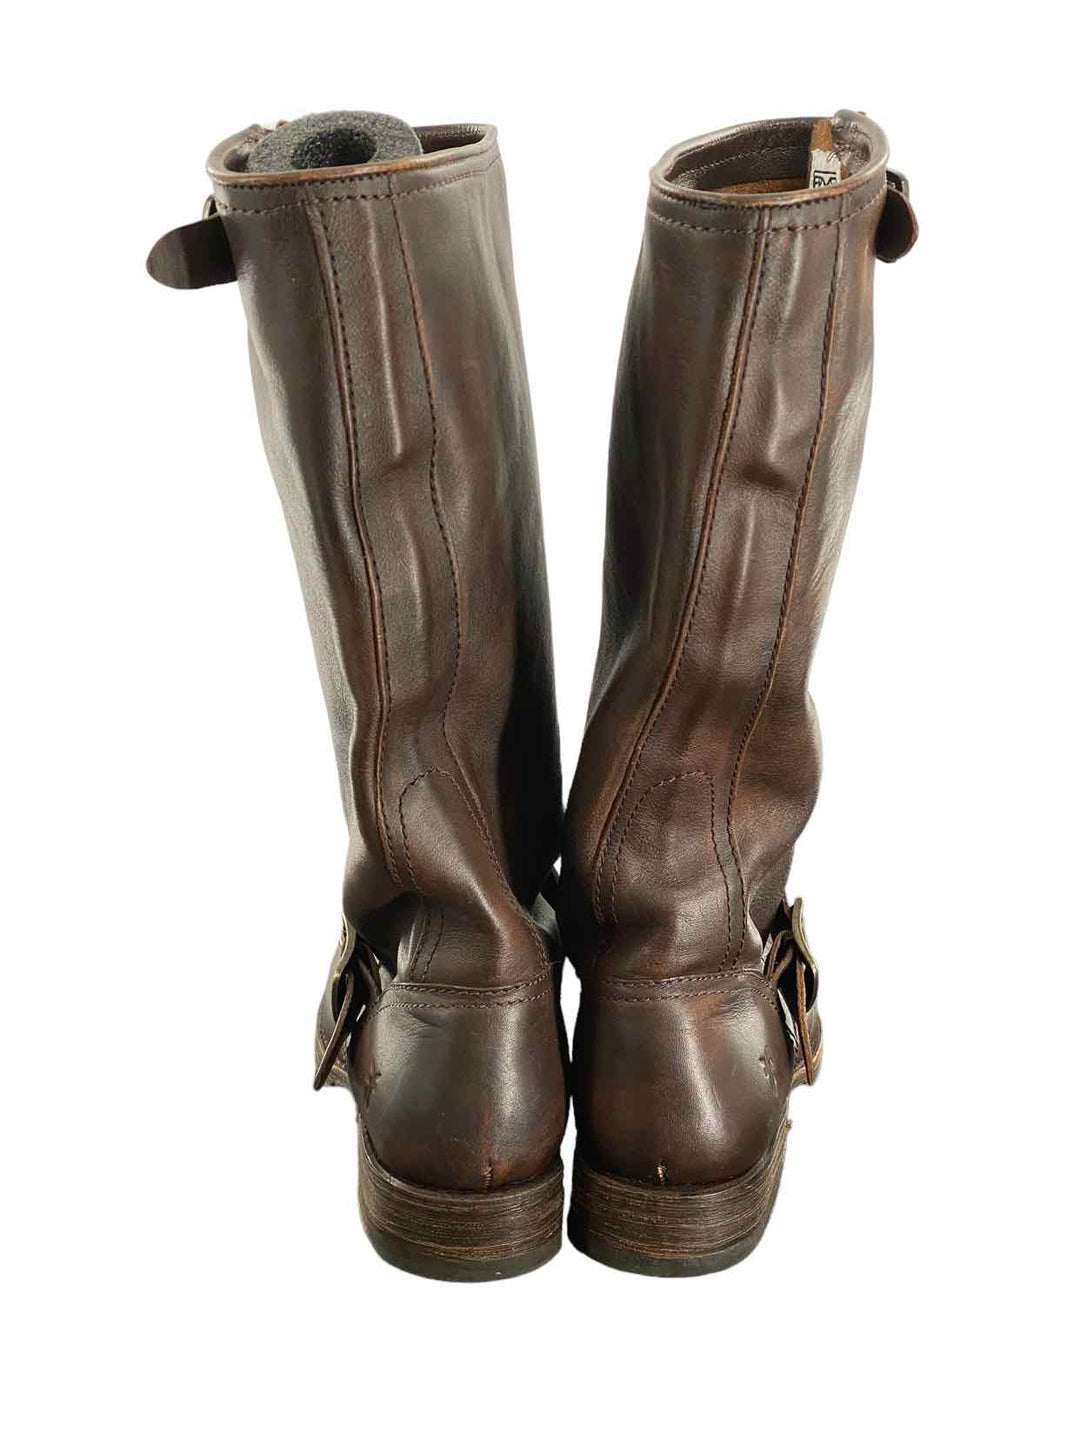 Frye Shoe Size 10 Brown Leather NWOT Boots(knee)